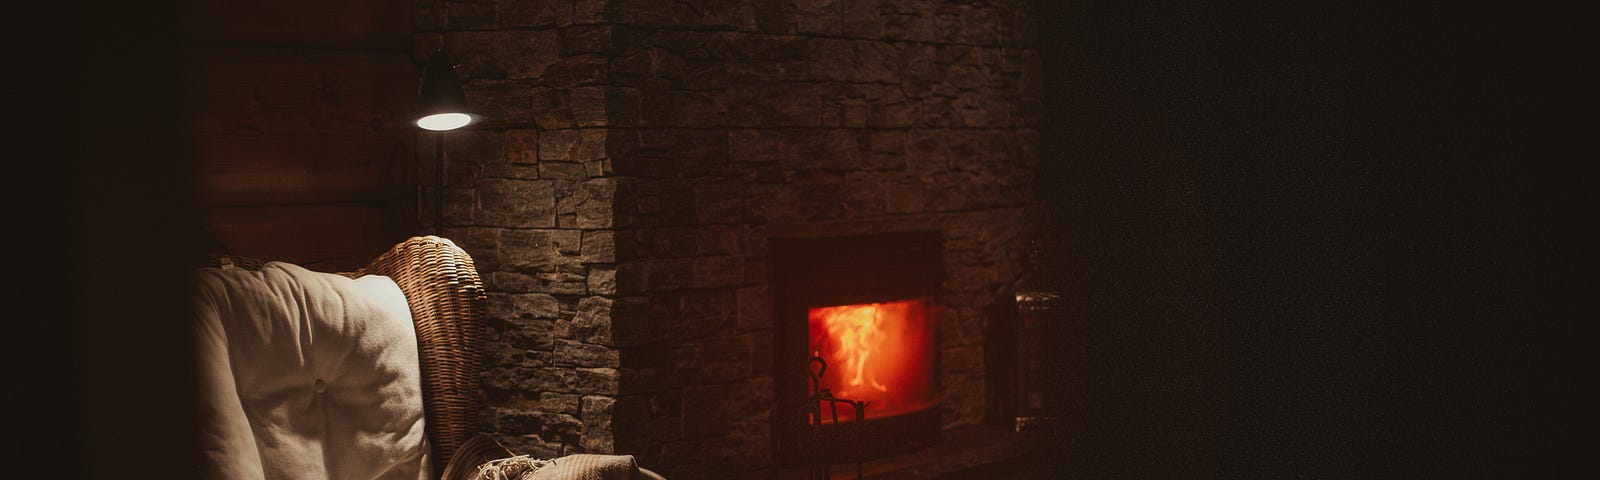 Darkish image of a burning fireplace in the middle of the image, and a chair to the left with a white blanket over it.